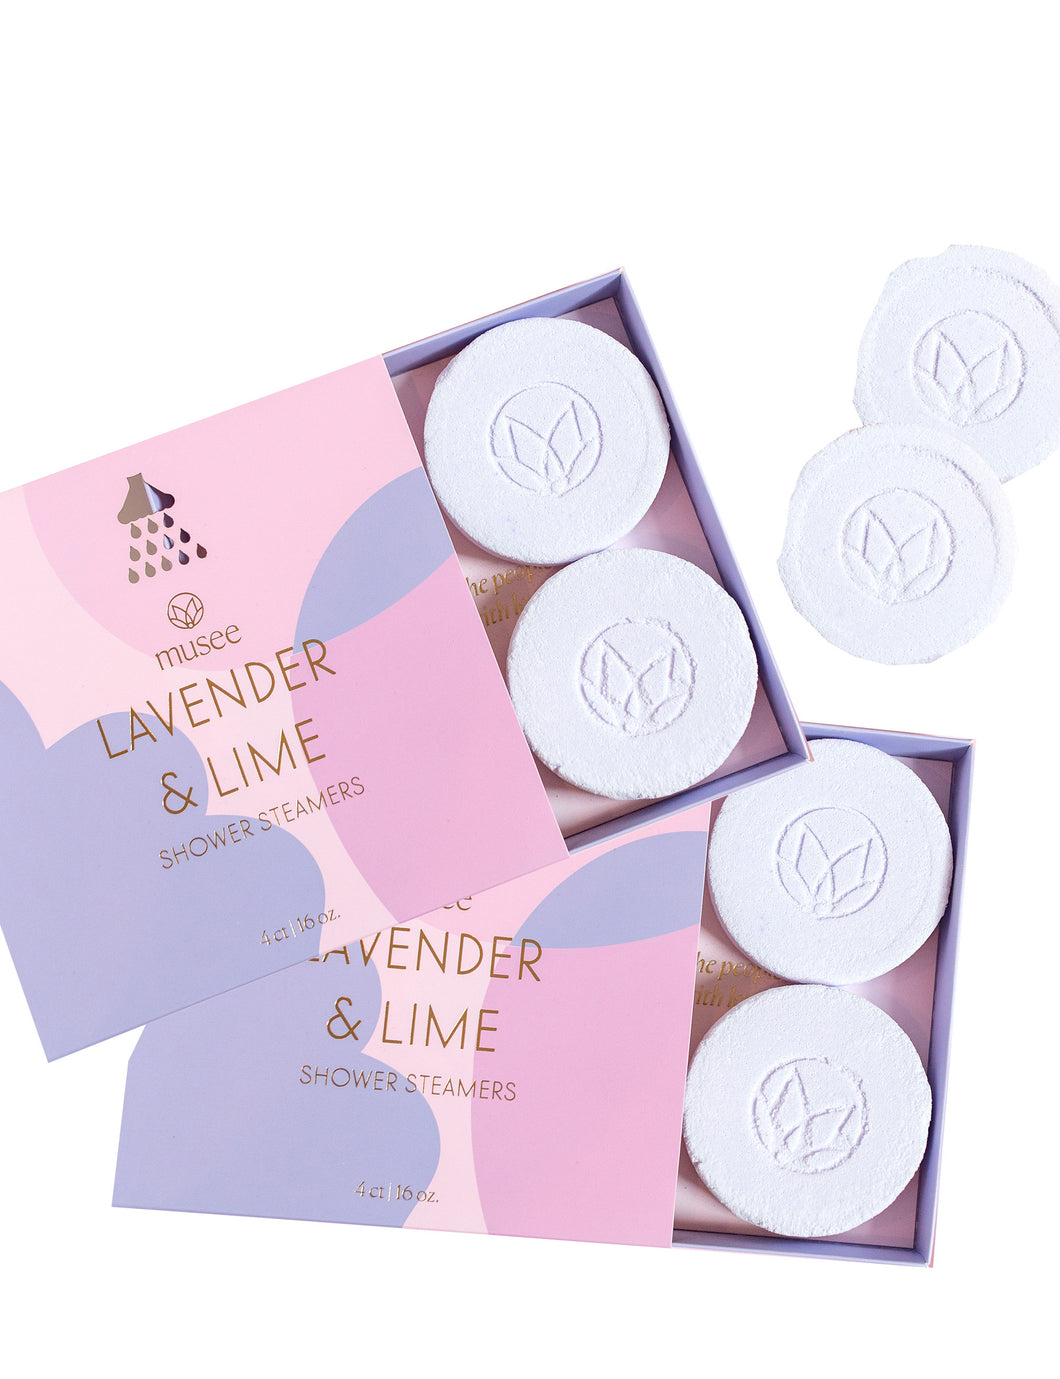 Musee Lavender and Lime Shower Steamers